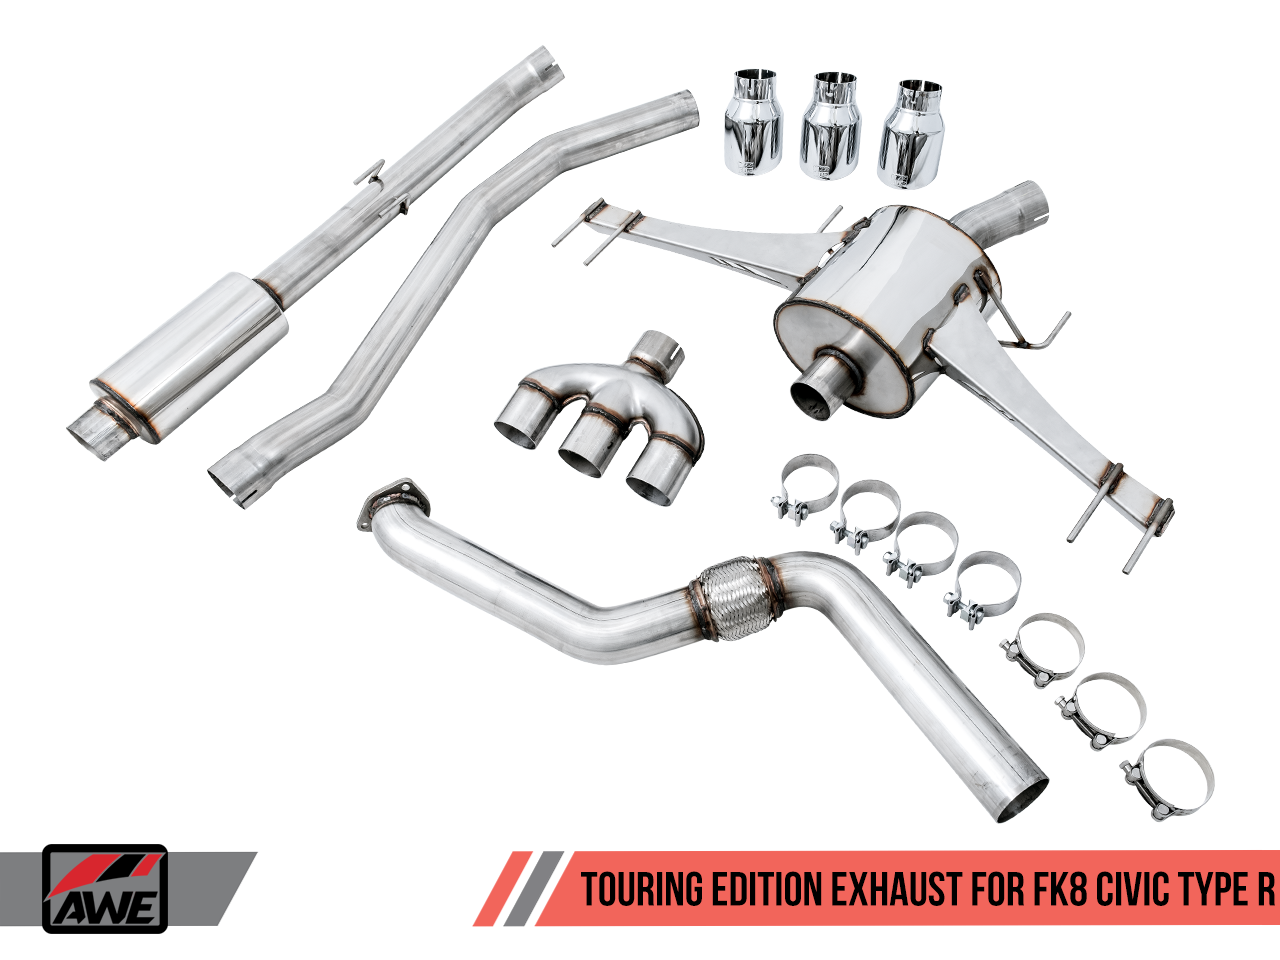 AWE Touring Edition Exhaust for FK8 Civic Type R (includes Front Pipe) - Triple Chrome Silver Tips